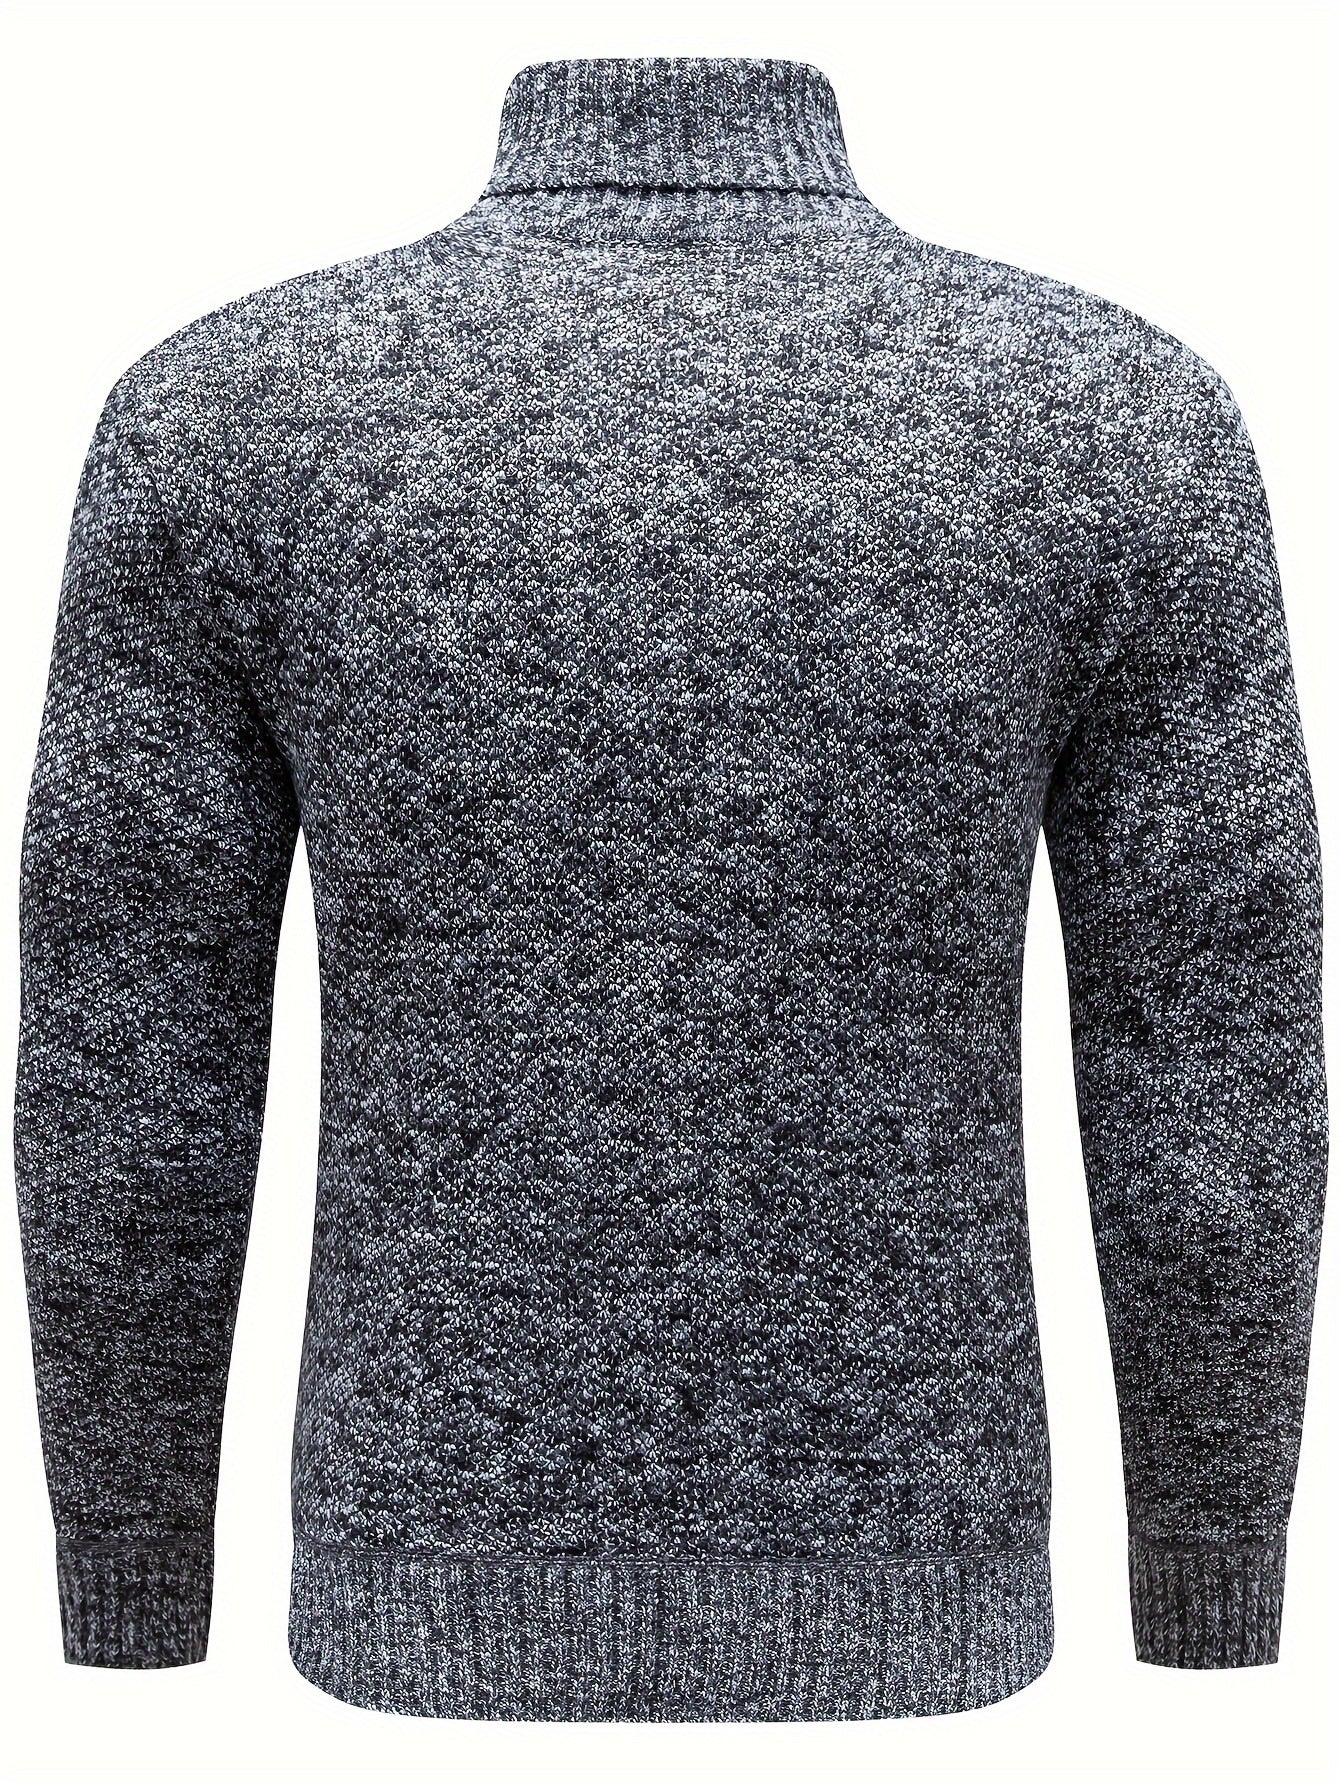 Turtle Neck Knitted Solid Sweater, Men's Casual Warm Slightly Stretch Pullover Sweater For Fall Winter